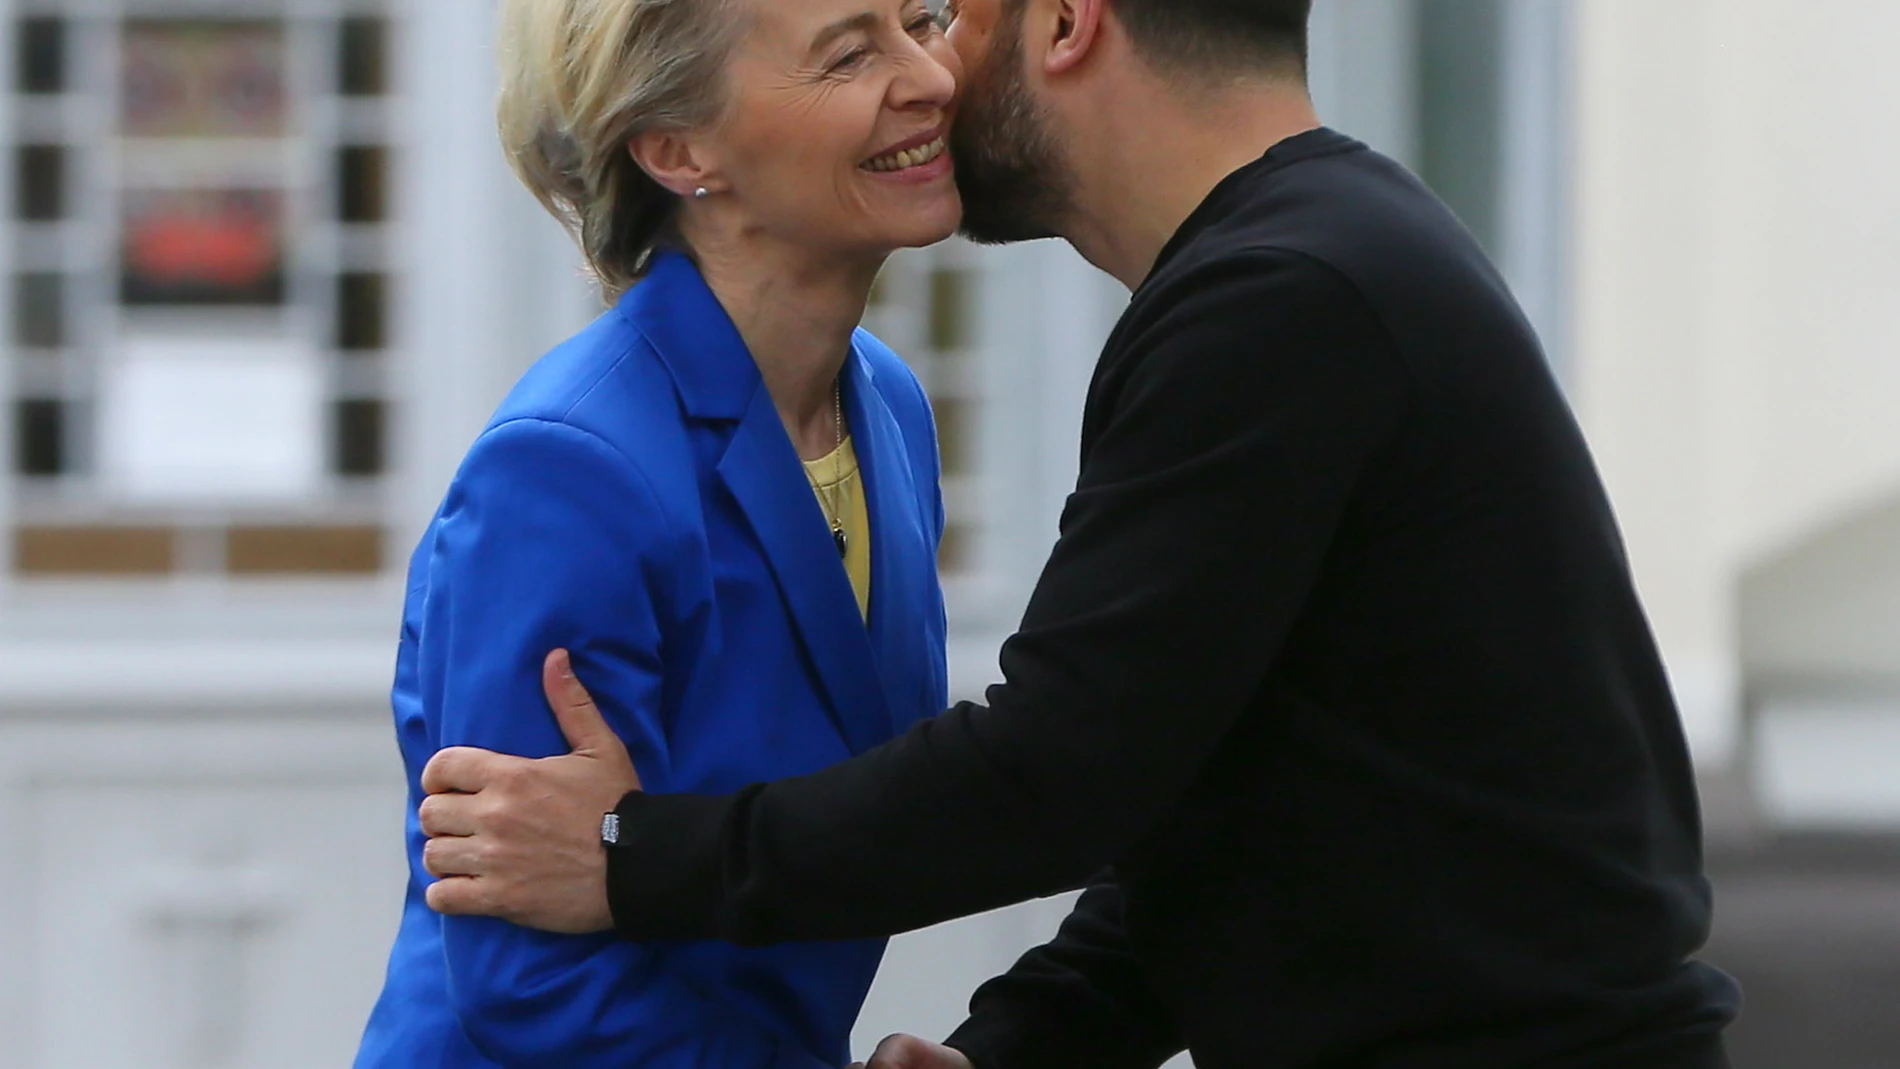 Kyiv (Ukraine), 09/05/2023.- Ukraine's President Volodymyr Zelensky (R) gives a warm welcome to the President of the European Commission Ursula von der Leyen (L) as they arrive for a joint meeting with the media near the St. Sophia Cathedral in Kyiv, Ukraine, 09 May 2023. Von der Leyen arrived in Kyiv to meet with top Ukrainian officials. President Zelensky announced that from now on May 09 will be annually celebrated as 'Europe Day' in Ukraine. Also on that day, some countries mark the 78th anniversary of Victory Day, the unconditional surrender of Nazi Germany on 08 May 1945, and the Allied Forces' victory, which marked the end of World War II in Europe. (Alemania, Rusia, Ucrania) EFE/EPA/STEPAN FRANKO 